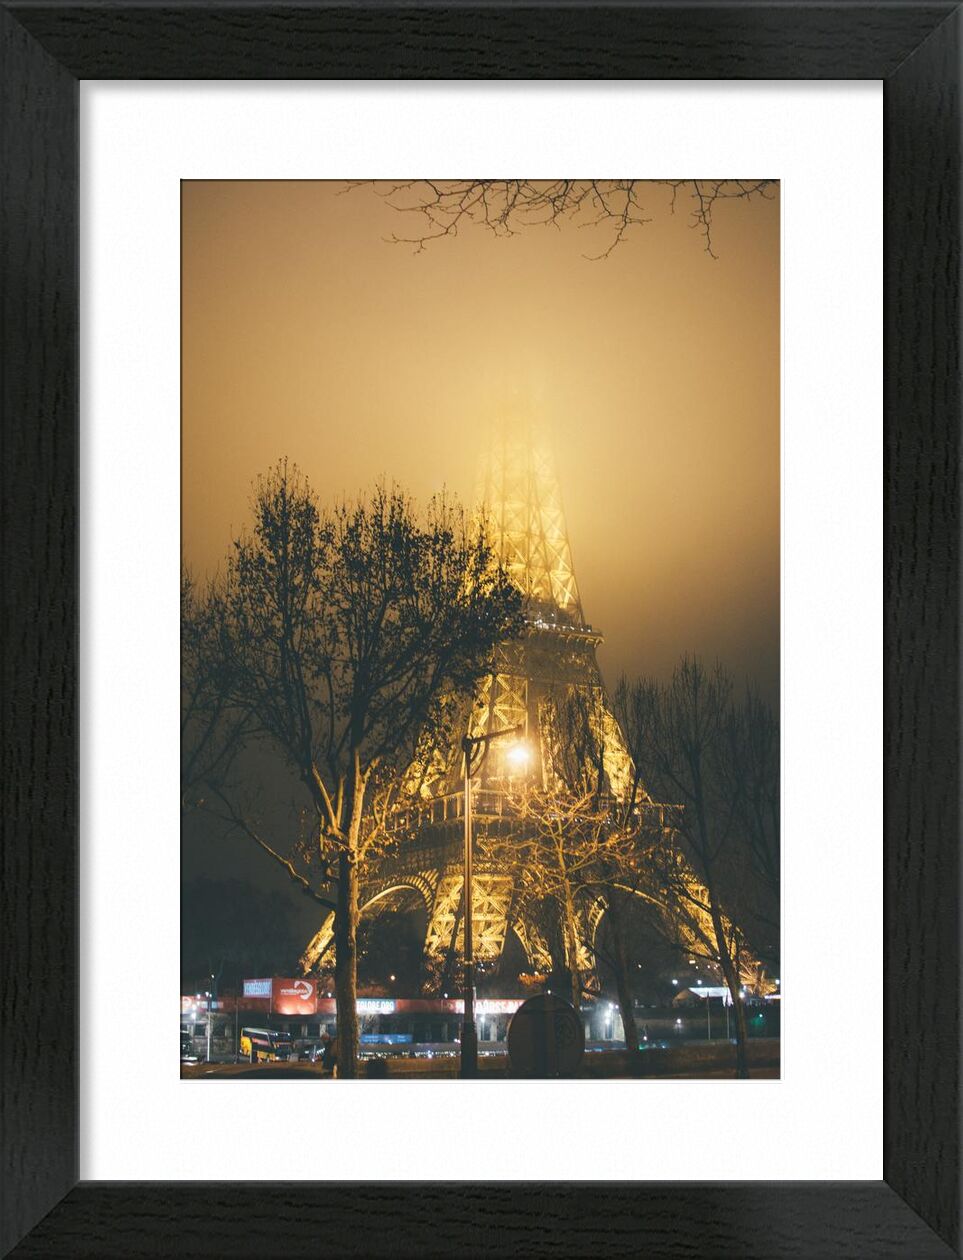 The masked iron lady from Aliss ART, Prodi Art, tree branches, street lamps, steel structure, 4k wallpaper, trees, tower, Paris, outdoors, night, lights, illuminated, HD wallpaper, France, foggy, fog, evening, Eiffel Tower, city